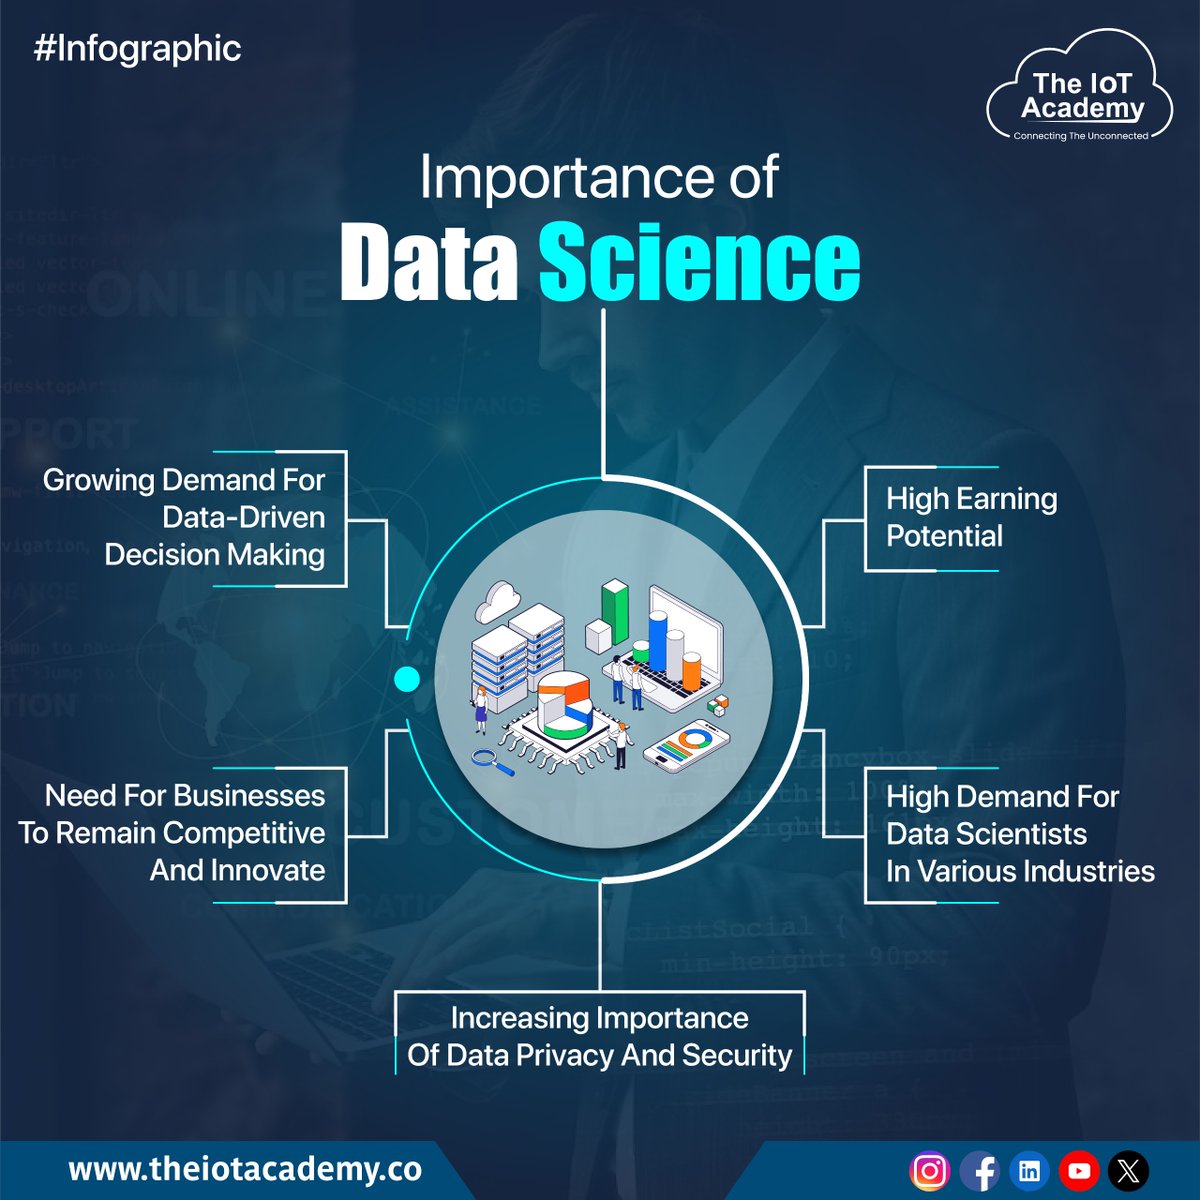 🔬 Unlocking the infinite possibilities of data! 🌐💡 Discover how data science is shaping the world we live in. 📊🚀
.
#TheIoTAcademy #edtech #education  #DataJourney #CodingLife #datascience #machinelearning #python #artificialintelligence #ai #data #dataanalytics #bigdata